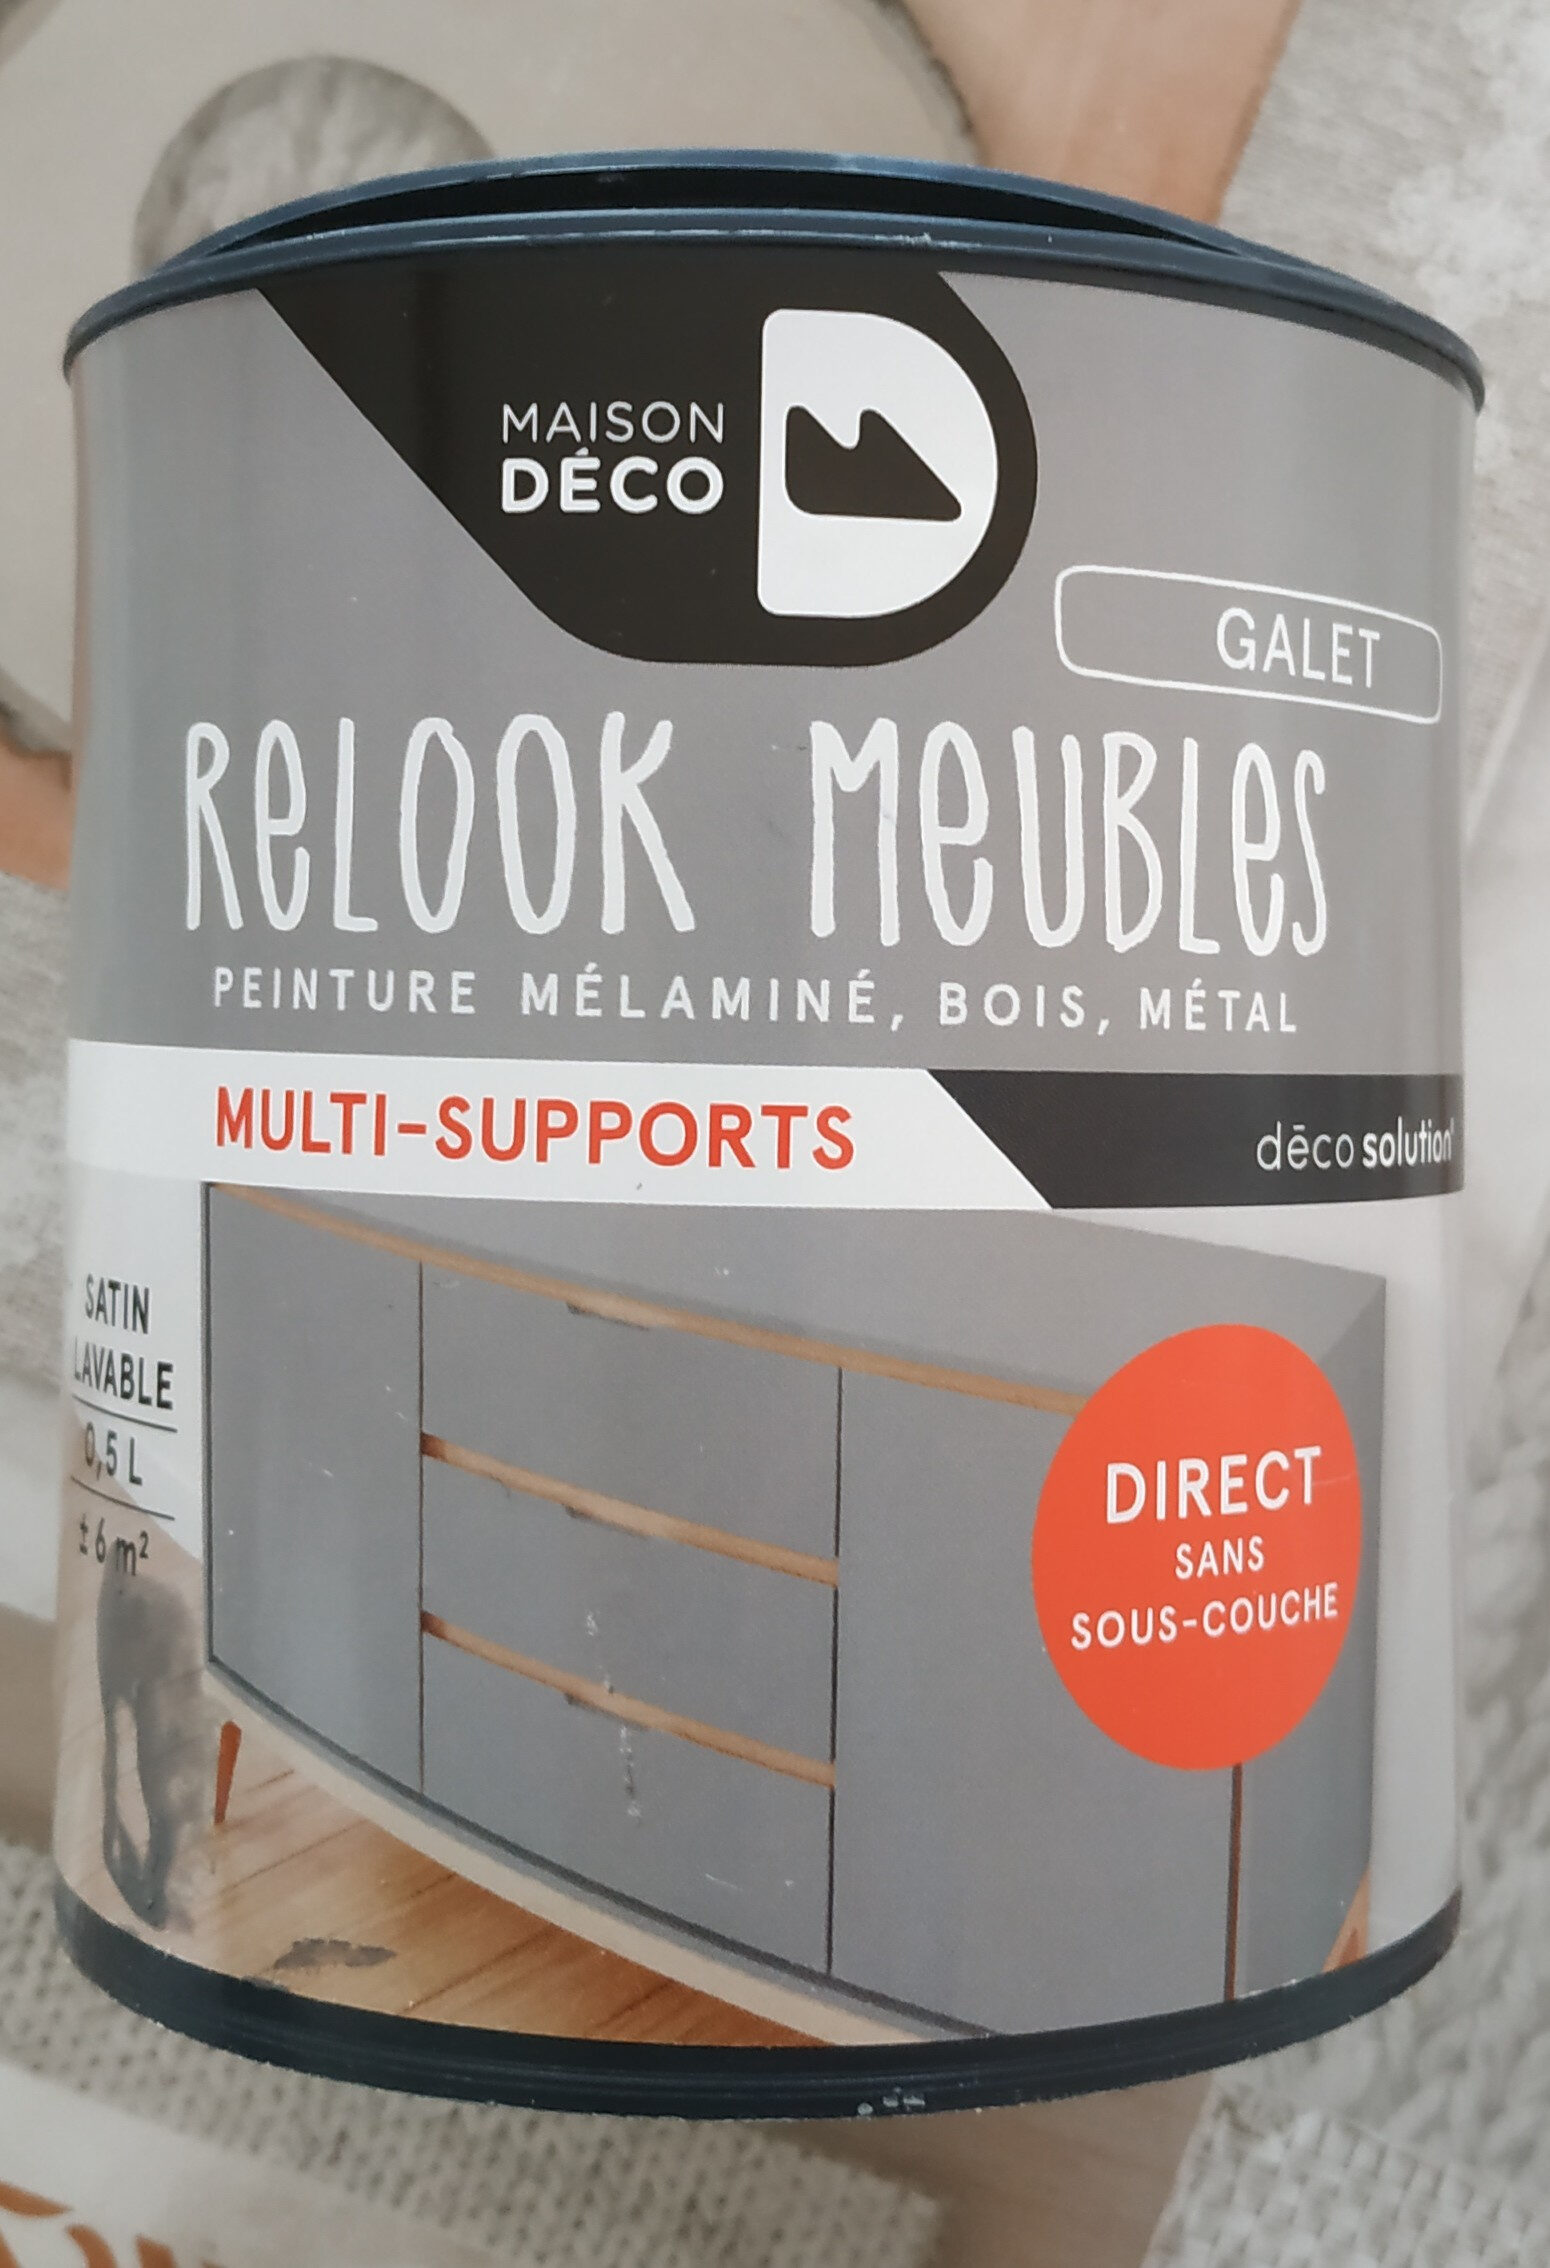 Relook meubles - Product - fr